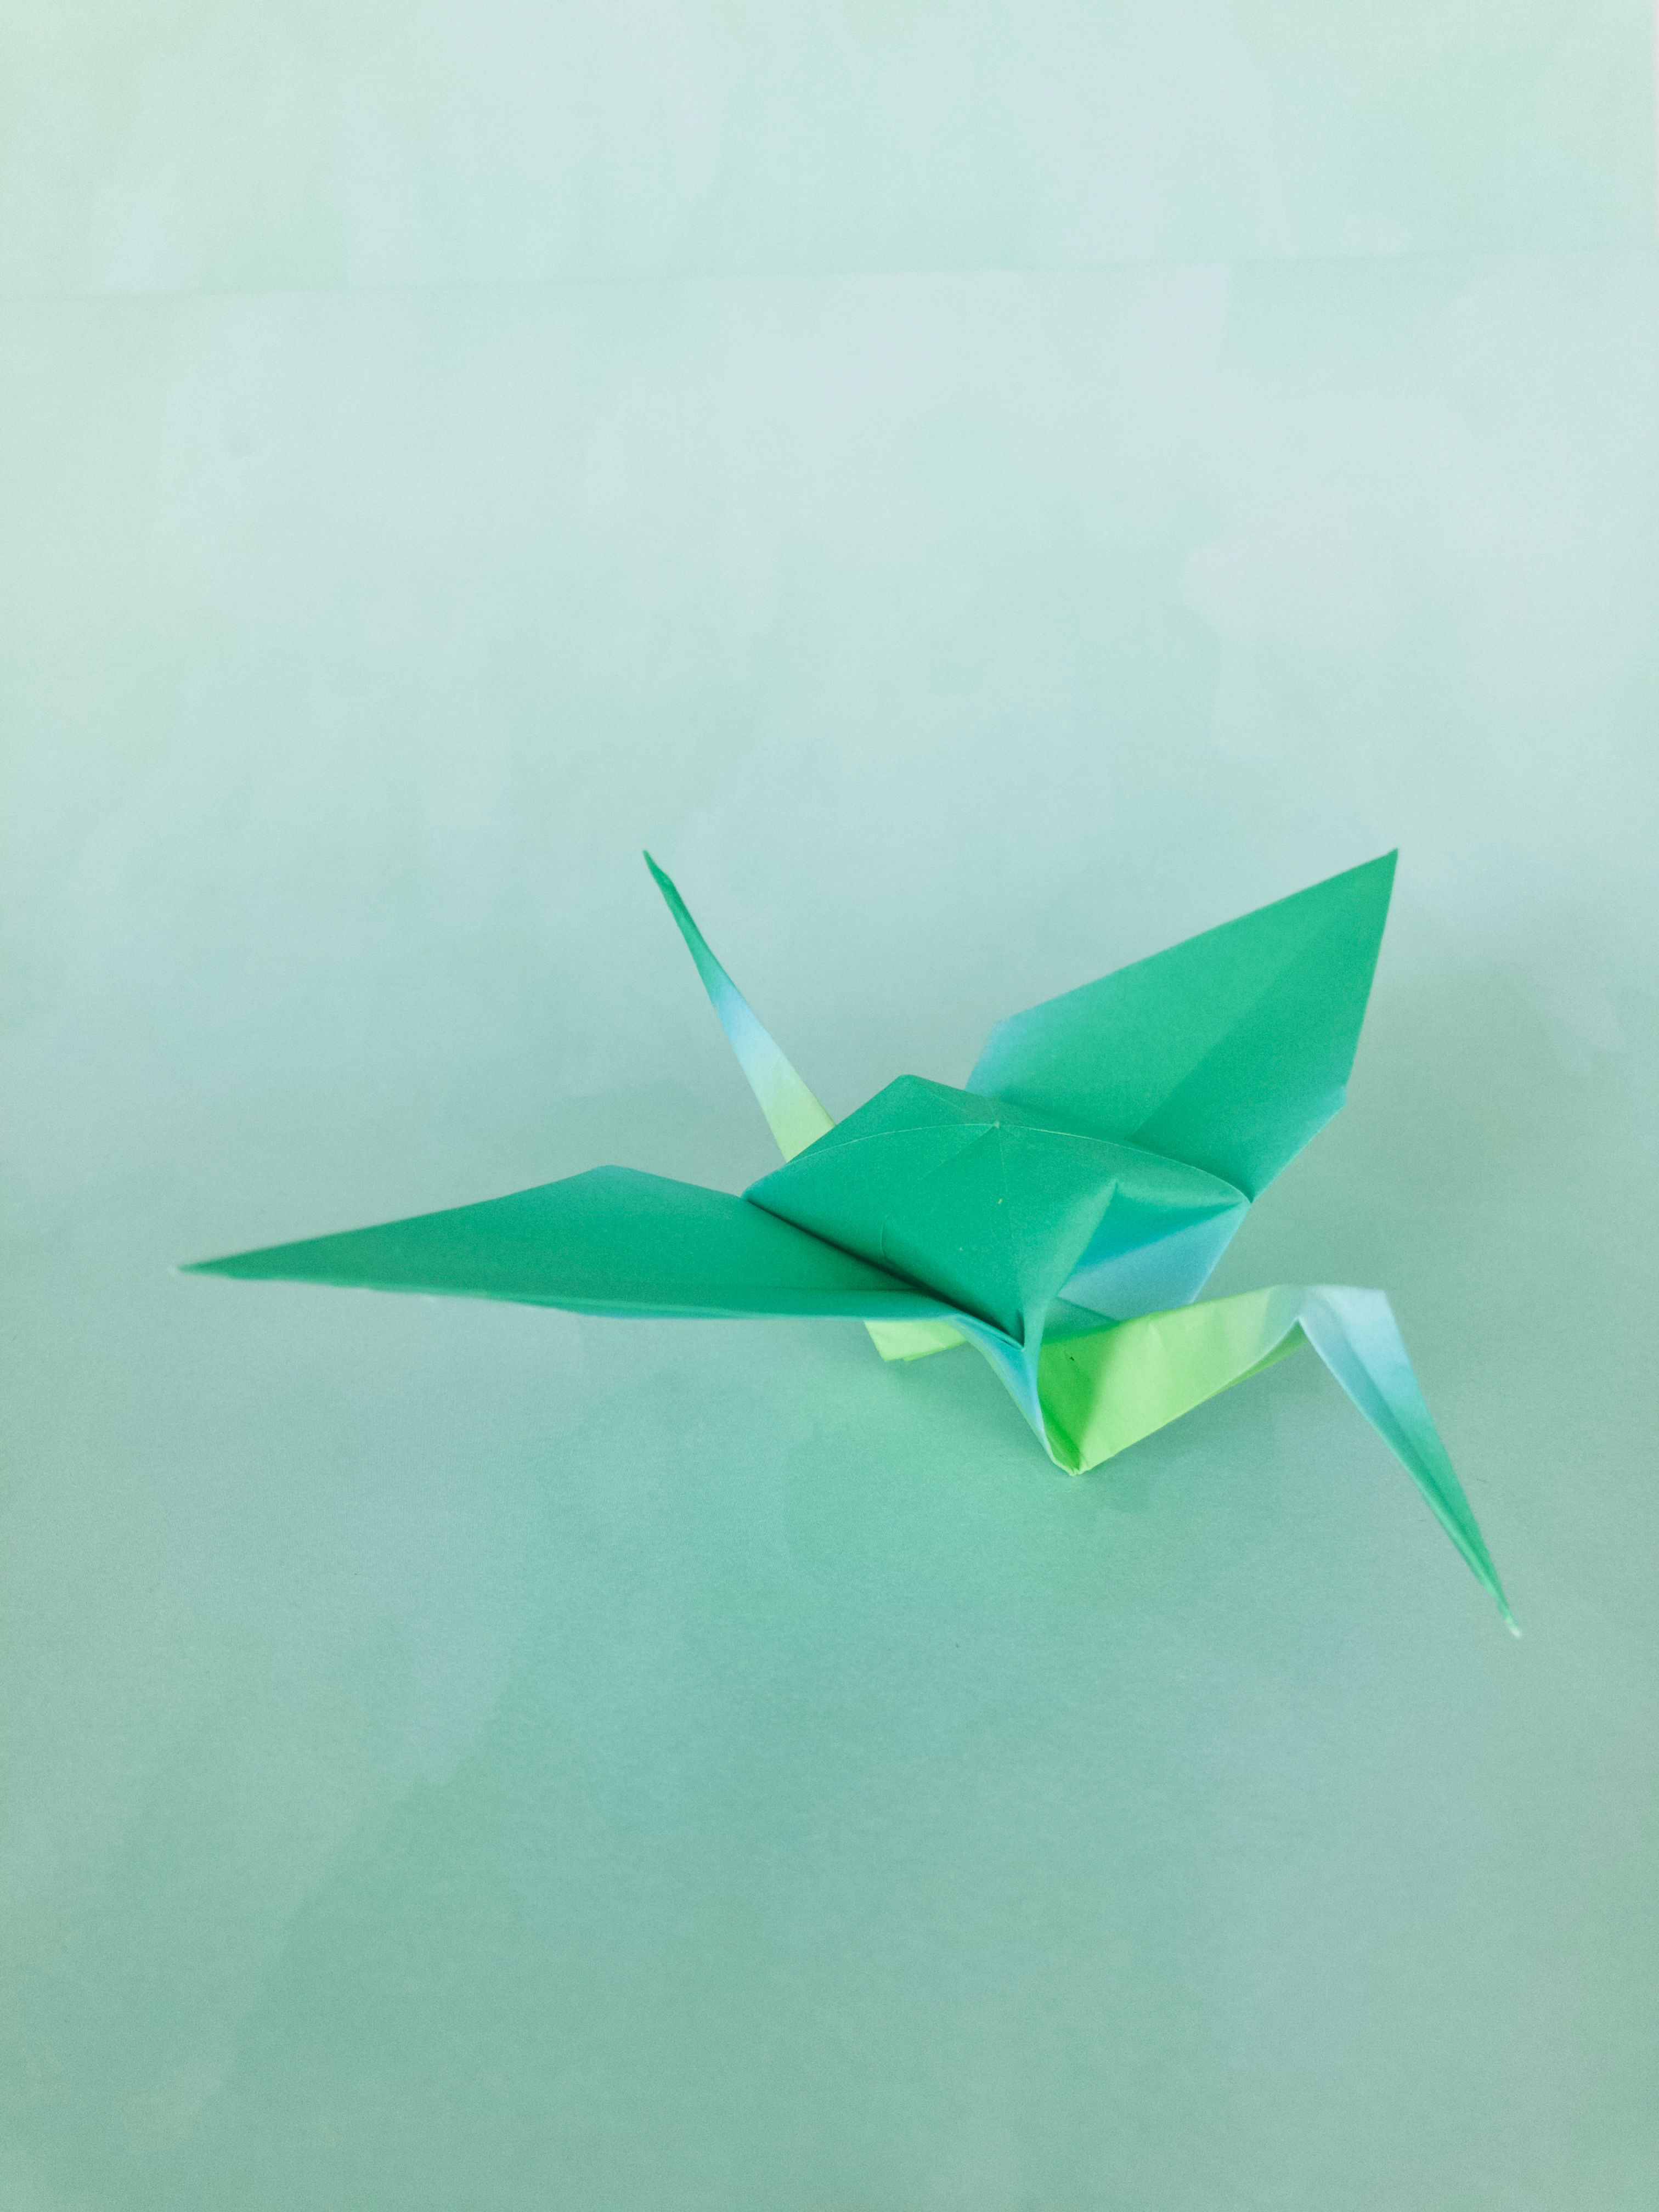 How To Make An Origami Crane Step By Step Easy Origami Crane Instructions